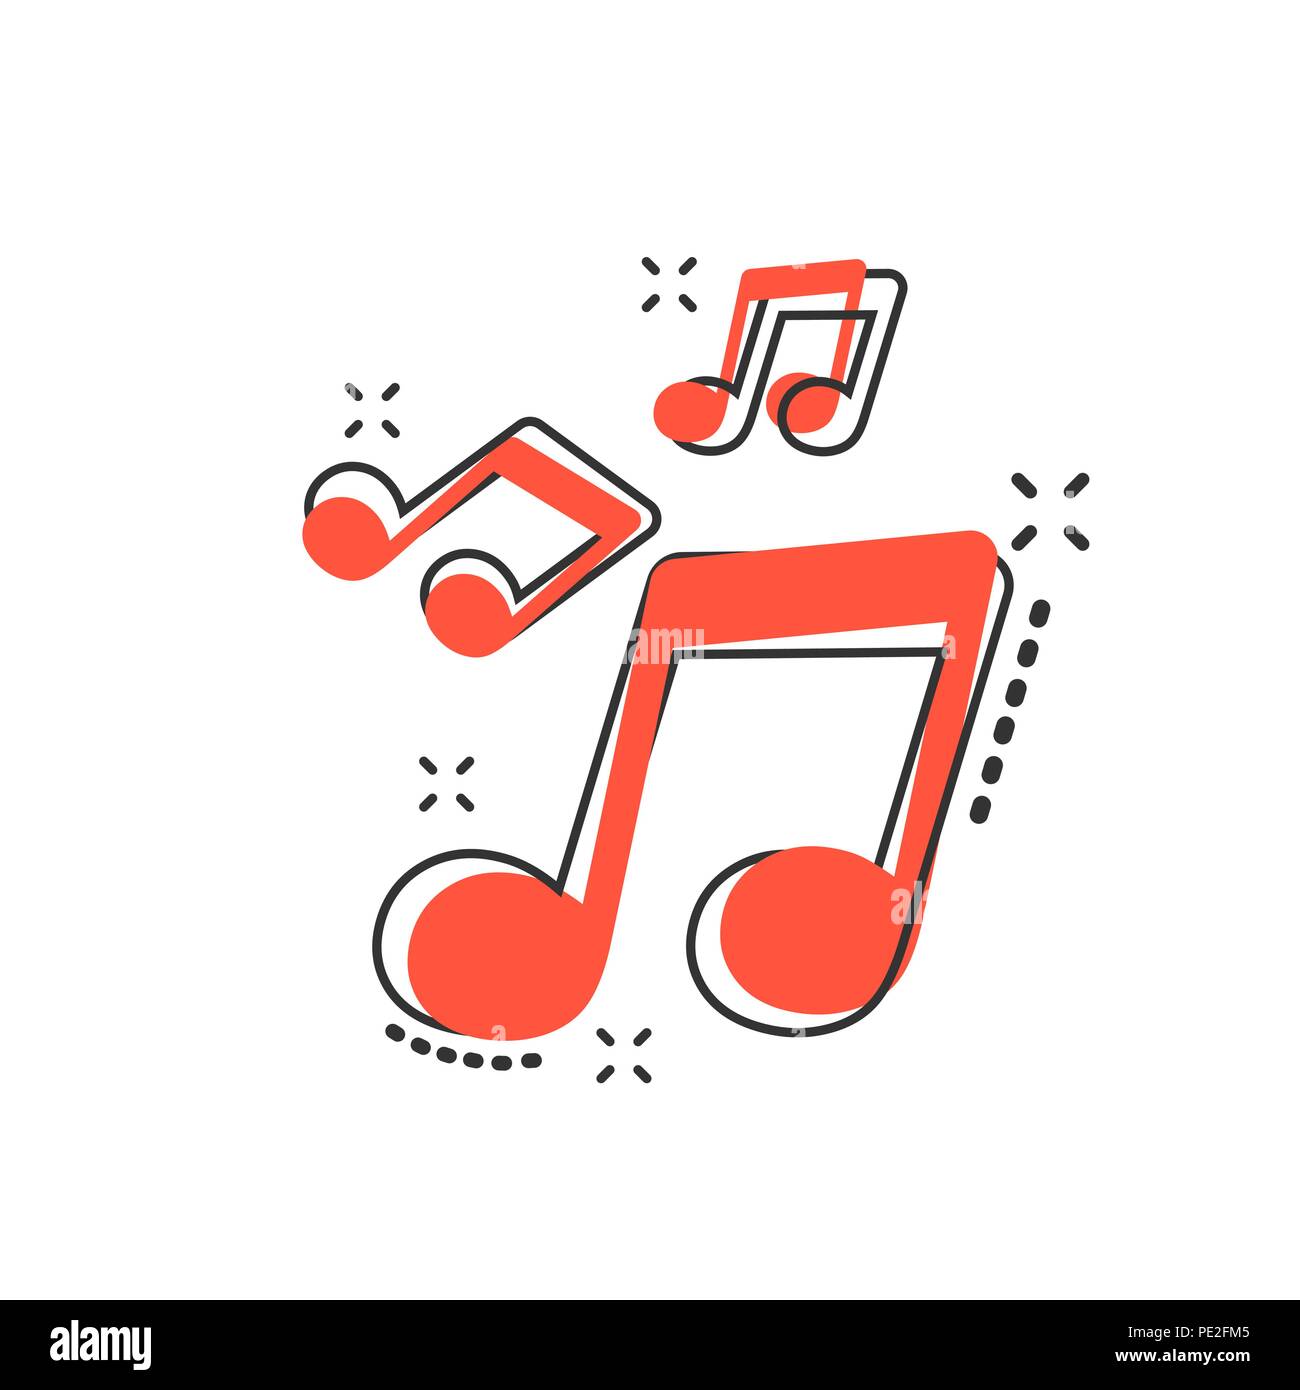 Vector cartoon music icon in comic style. Sound note sign illustration pictogram. Melody music business splash effect concept. Stock Vector